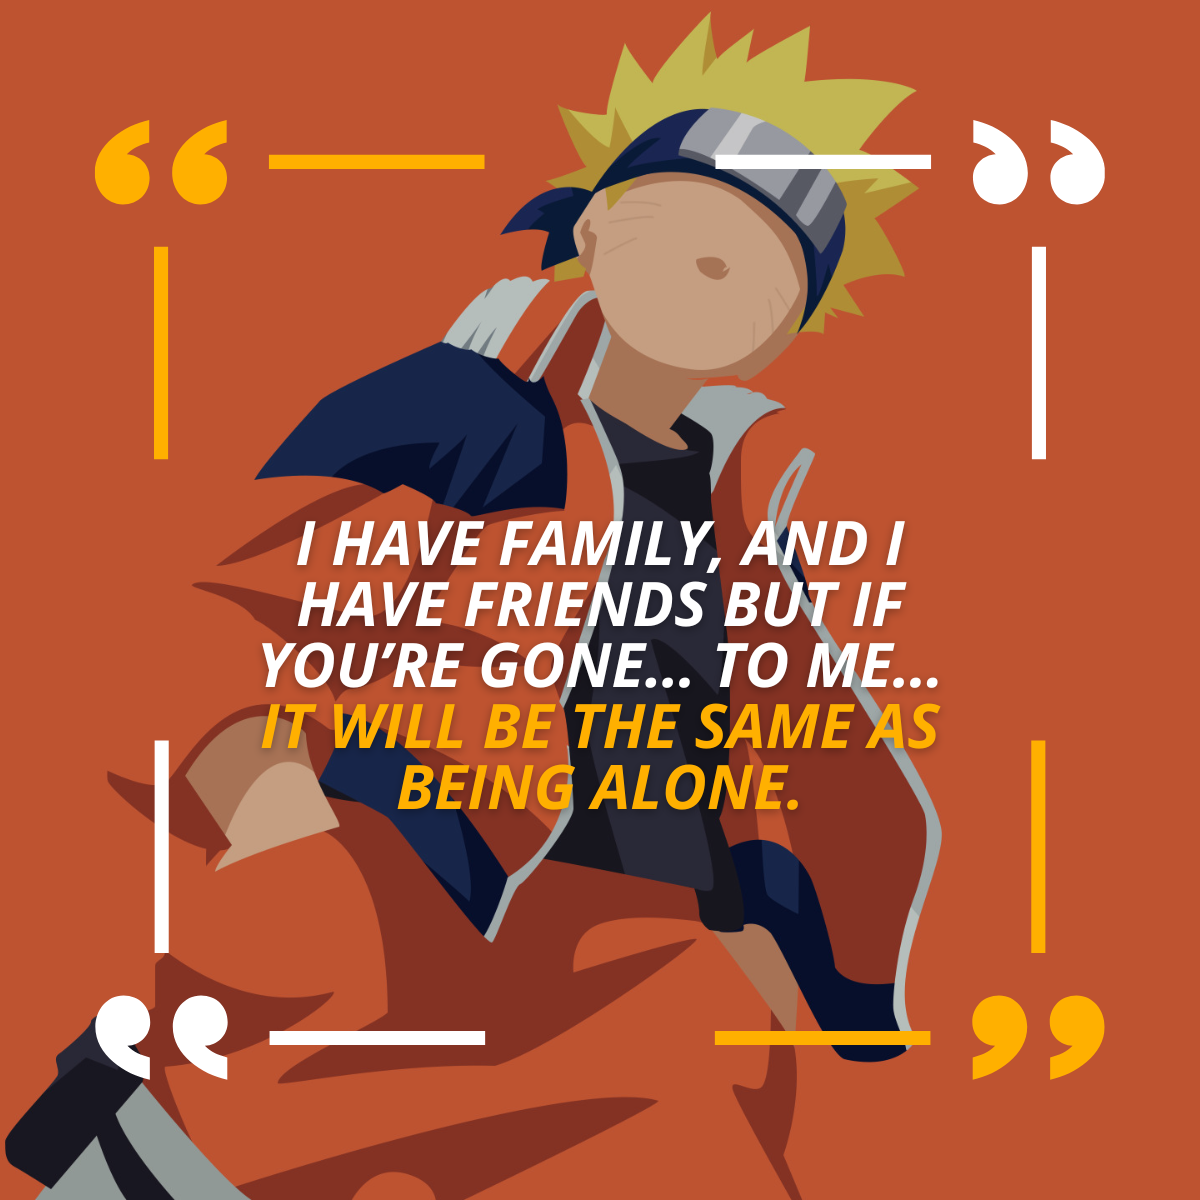 Naruto Quotes for Instagram